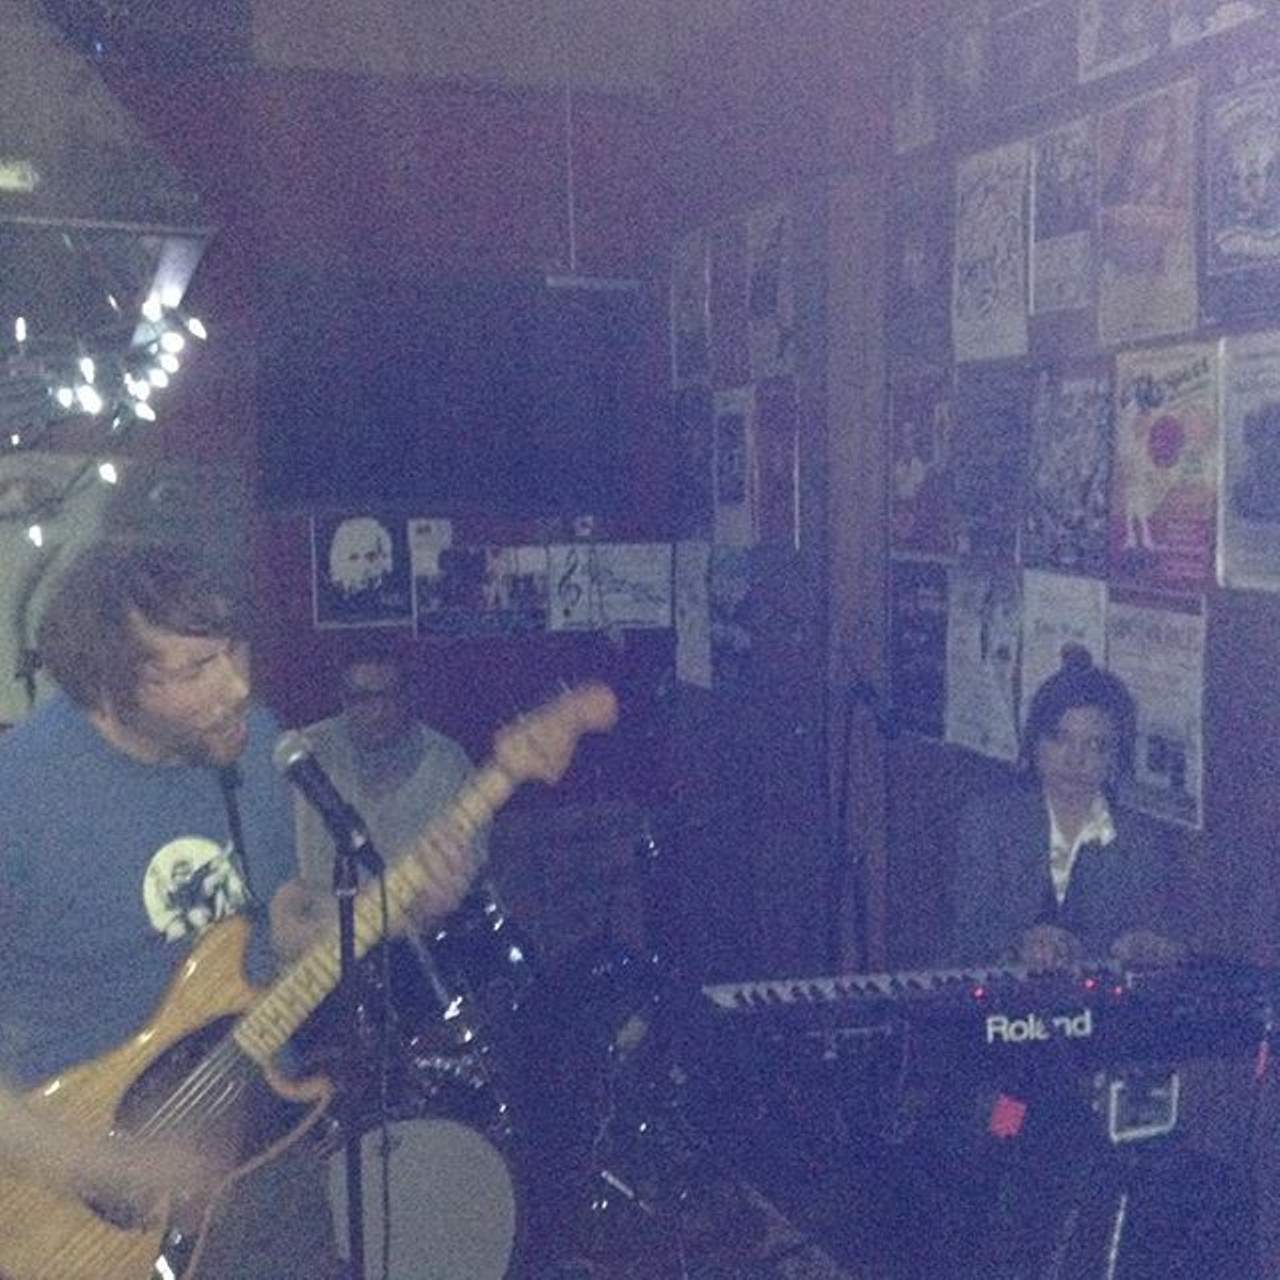 @steveogrime73: "Shos lords at the seven bros. #hmf #detroitgigs"